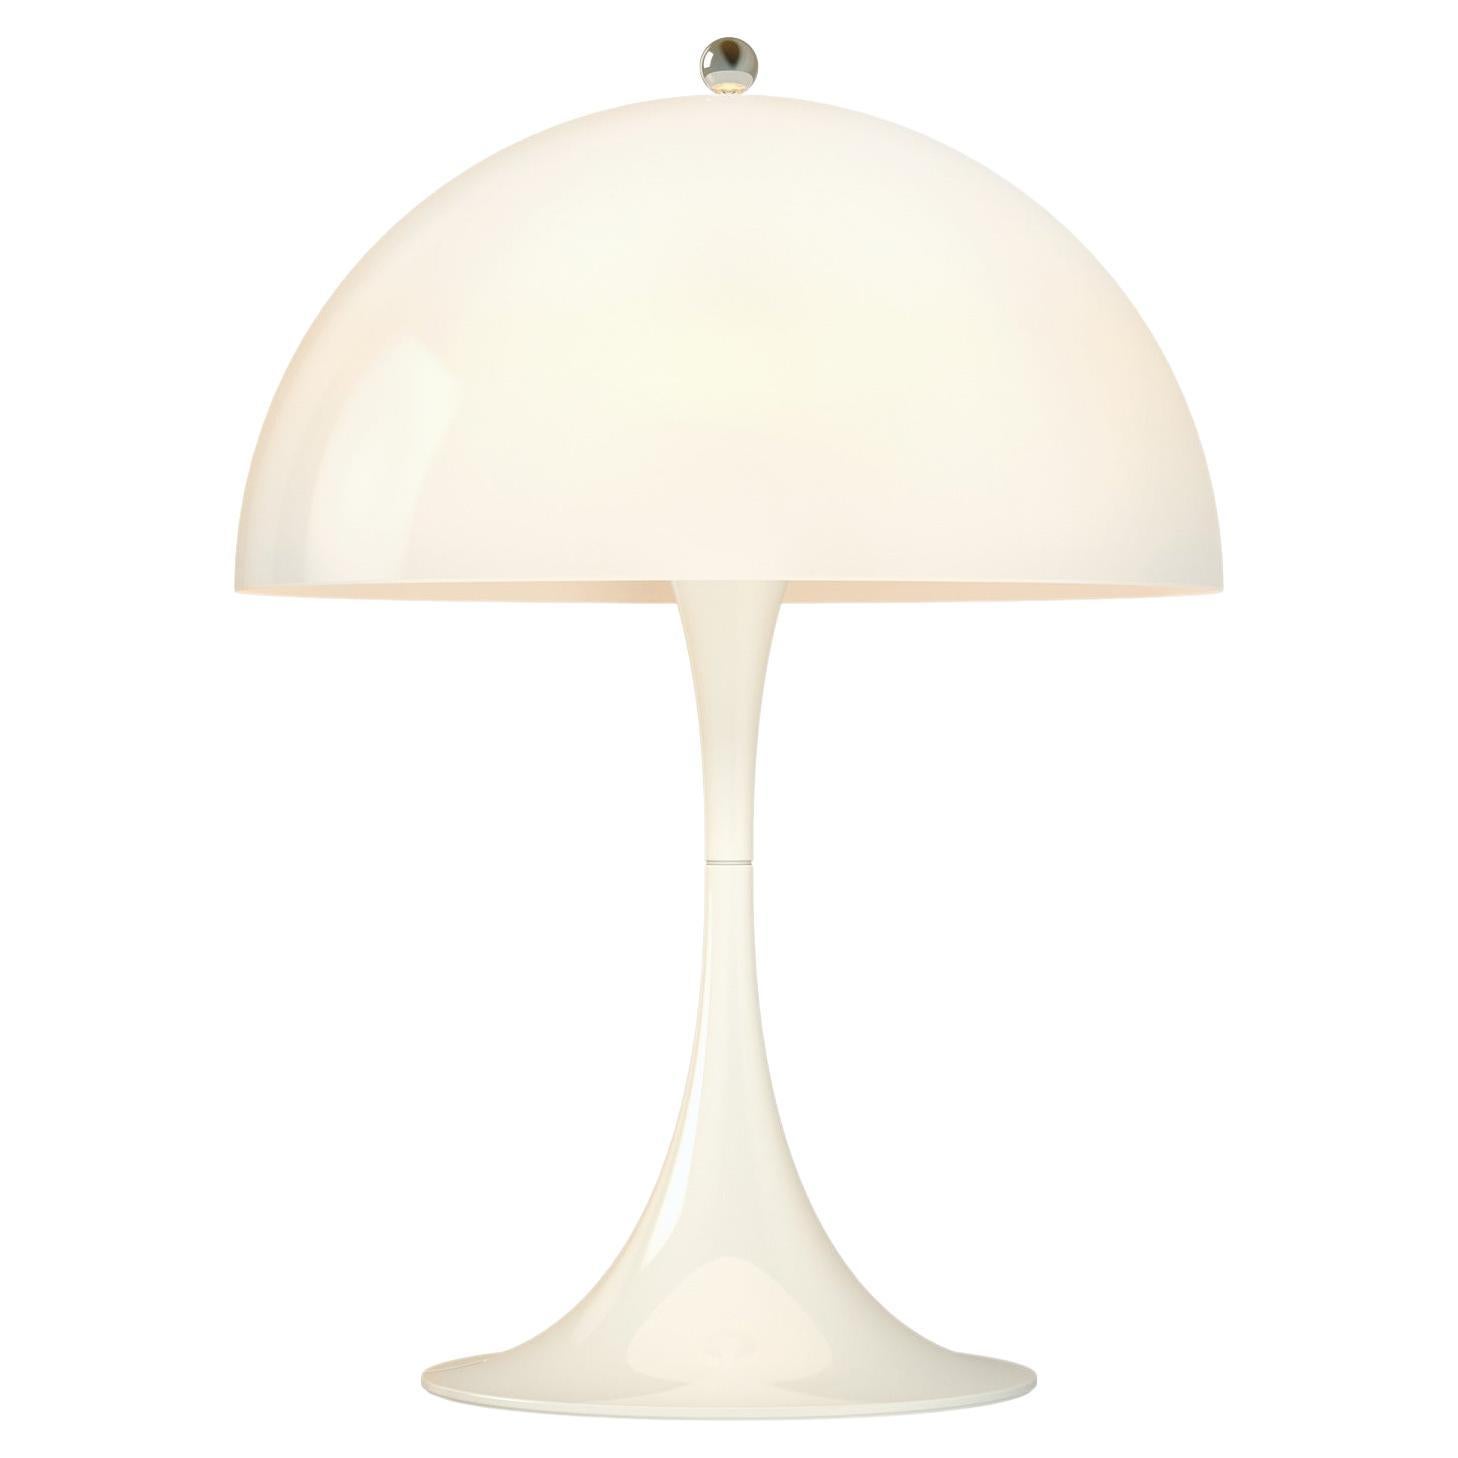 Louis Poulsen Panthella 250 Table Lamp in Opal by Verner Panton For Sale